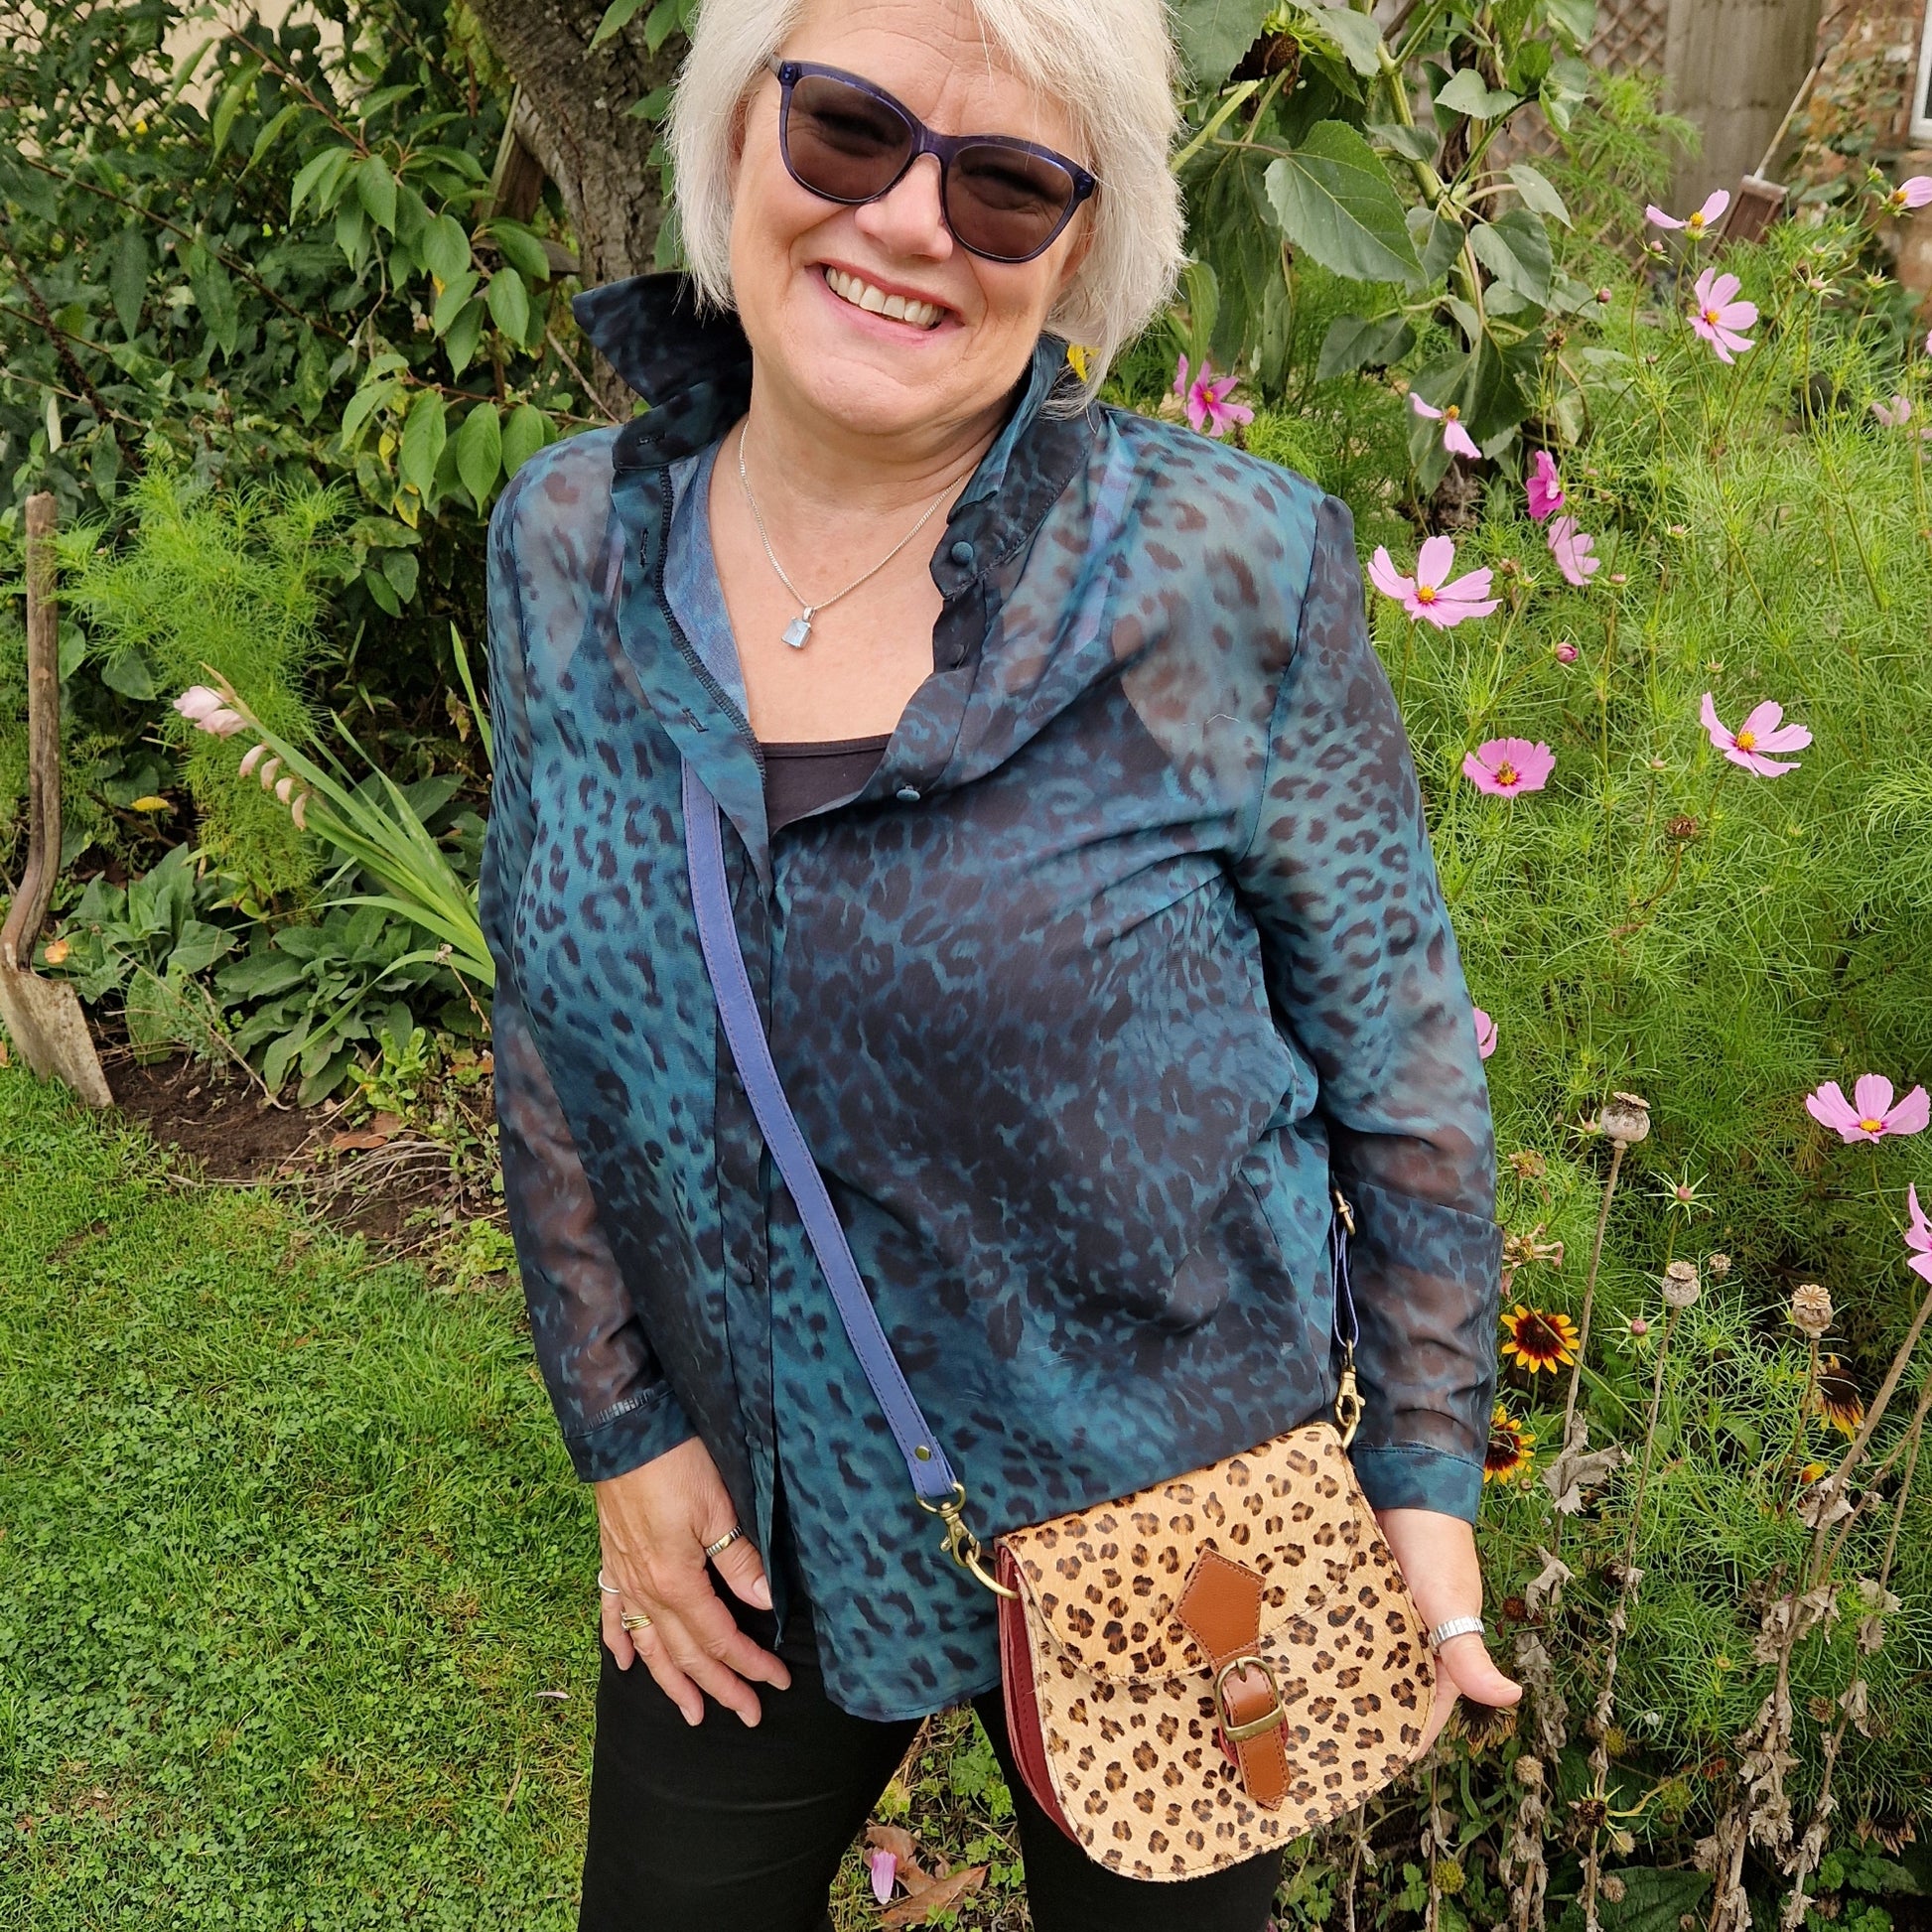 Lady with a leopard print leather bag.